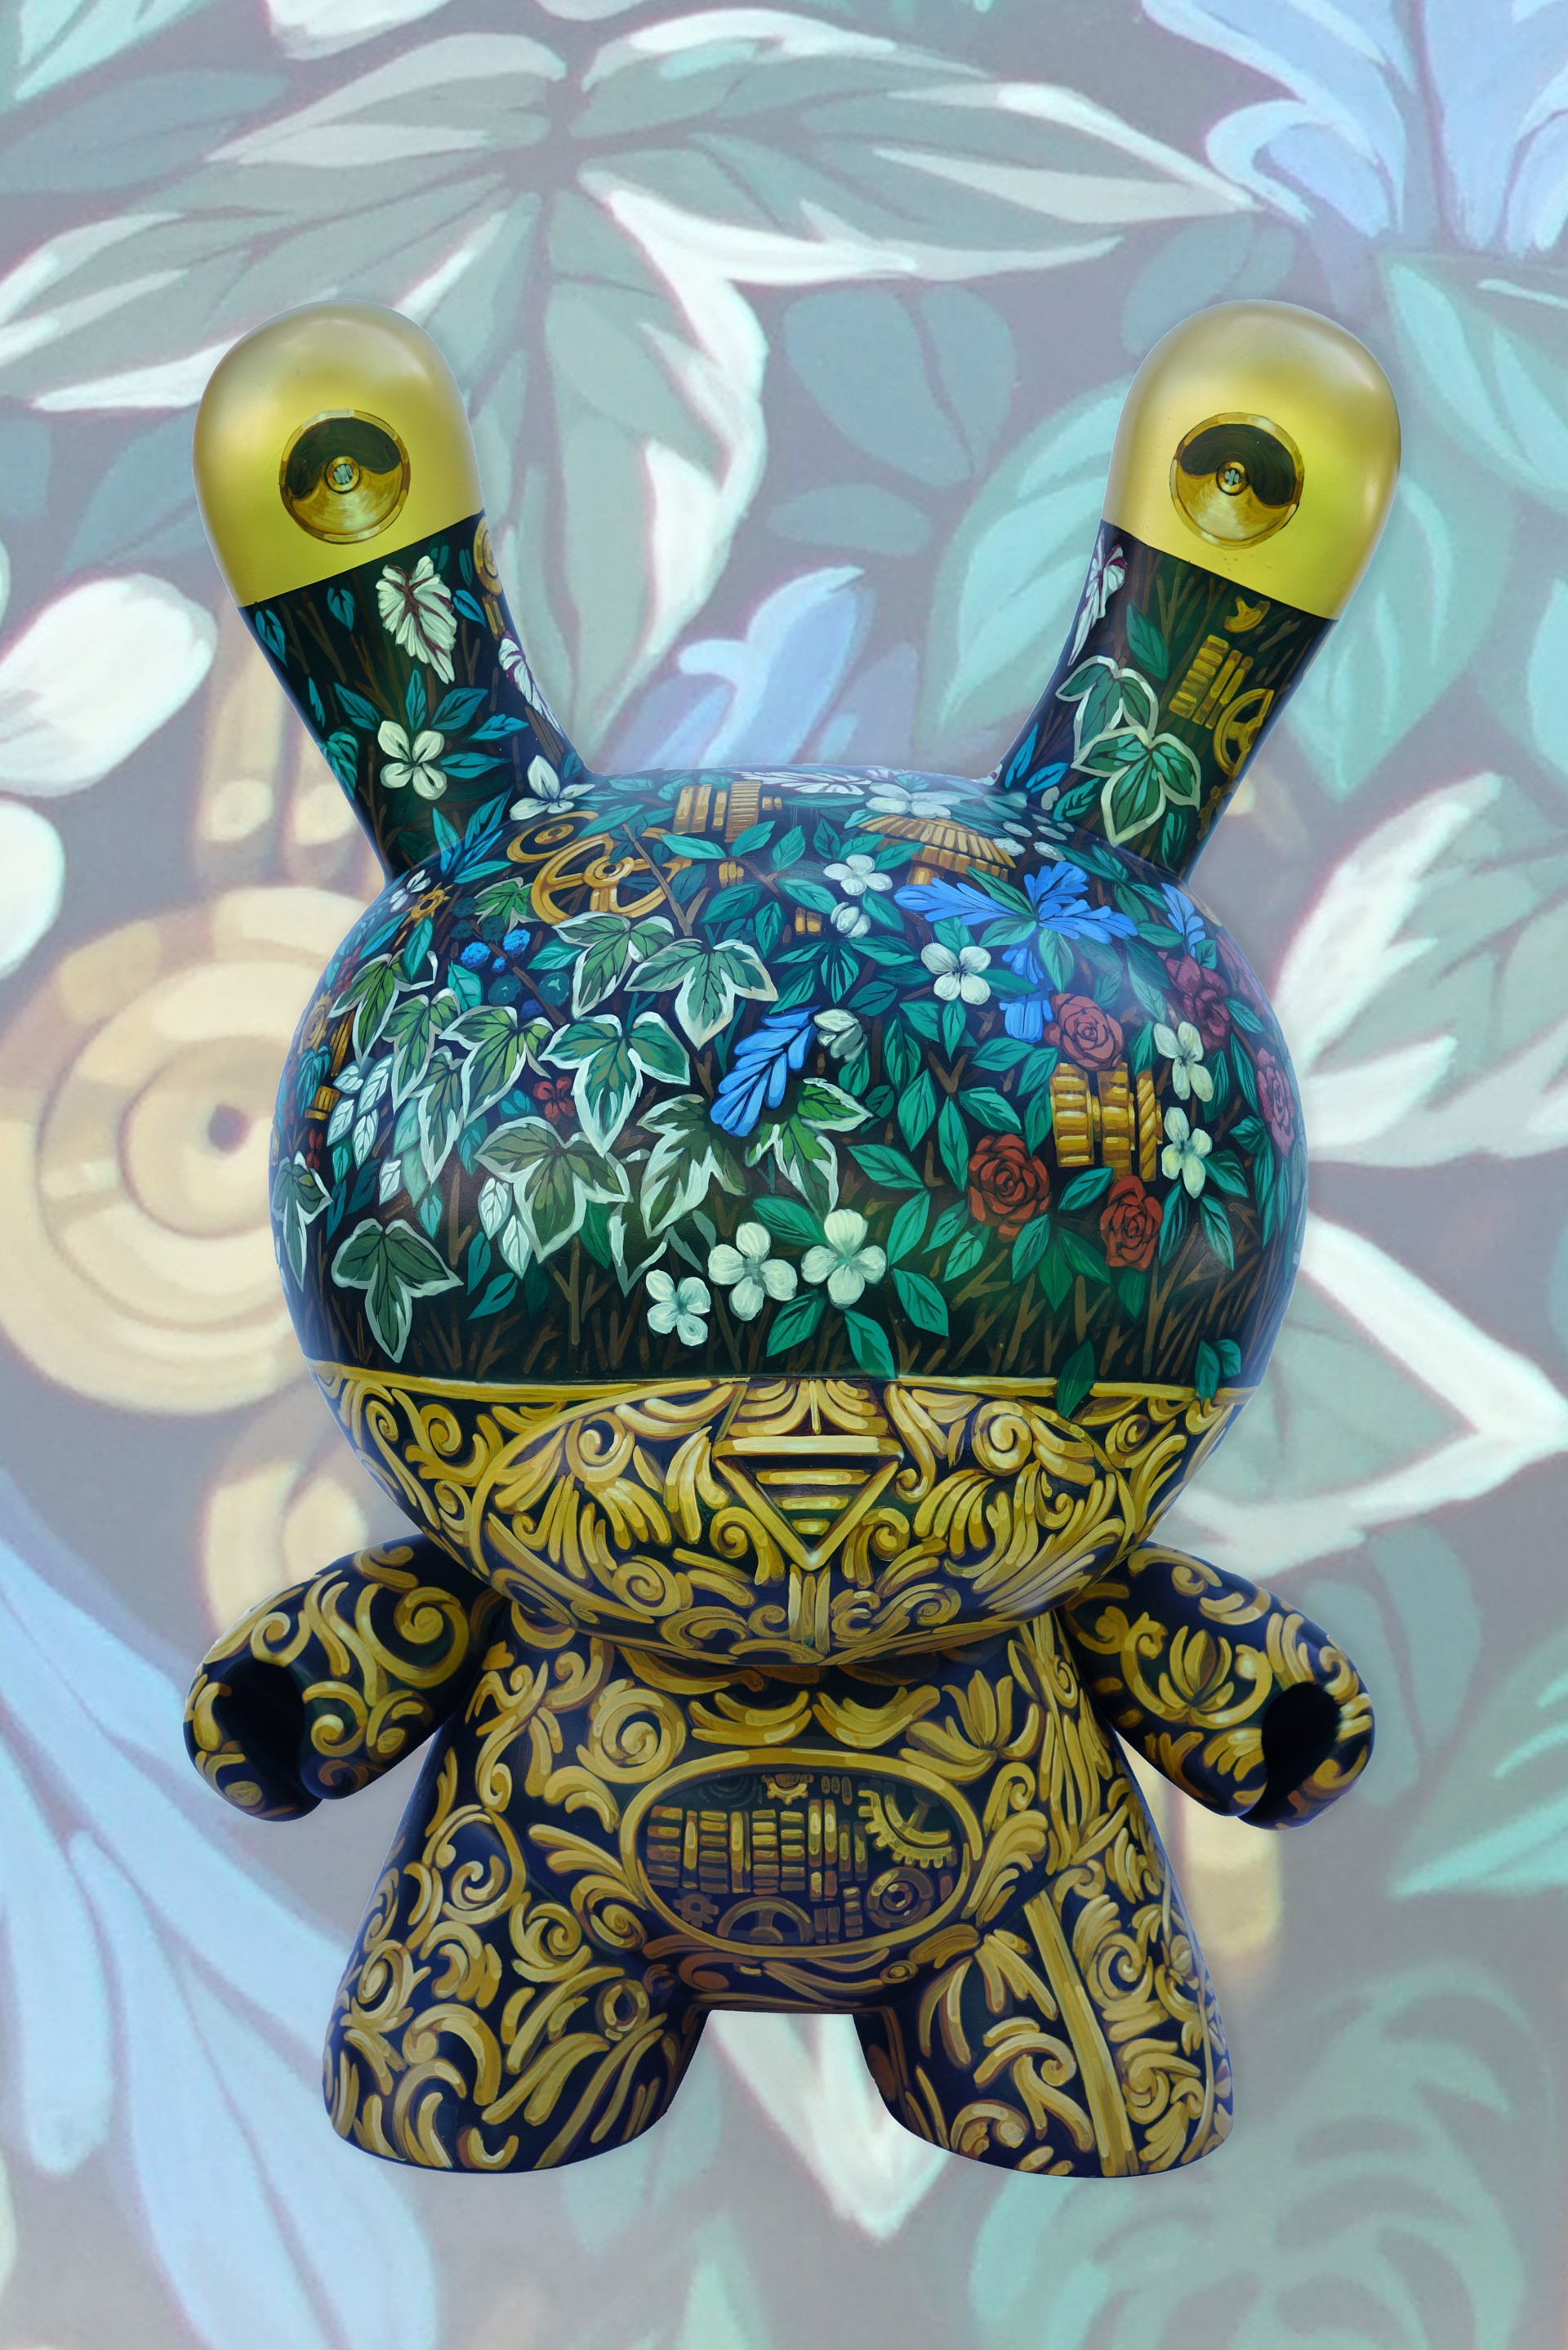 Hand Painted Kidrobot x PixelPancho 4' Dunny by PixelPancho